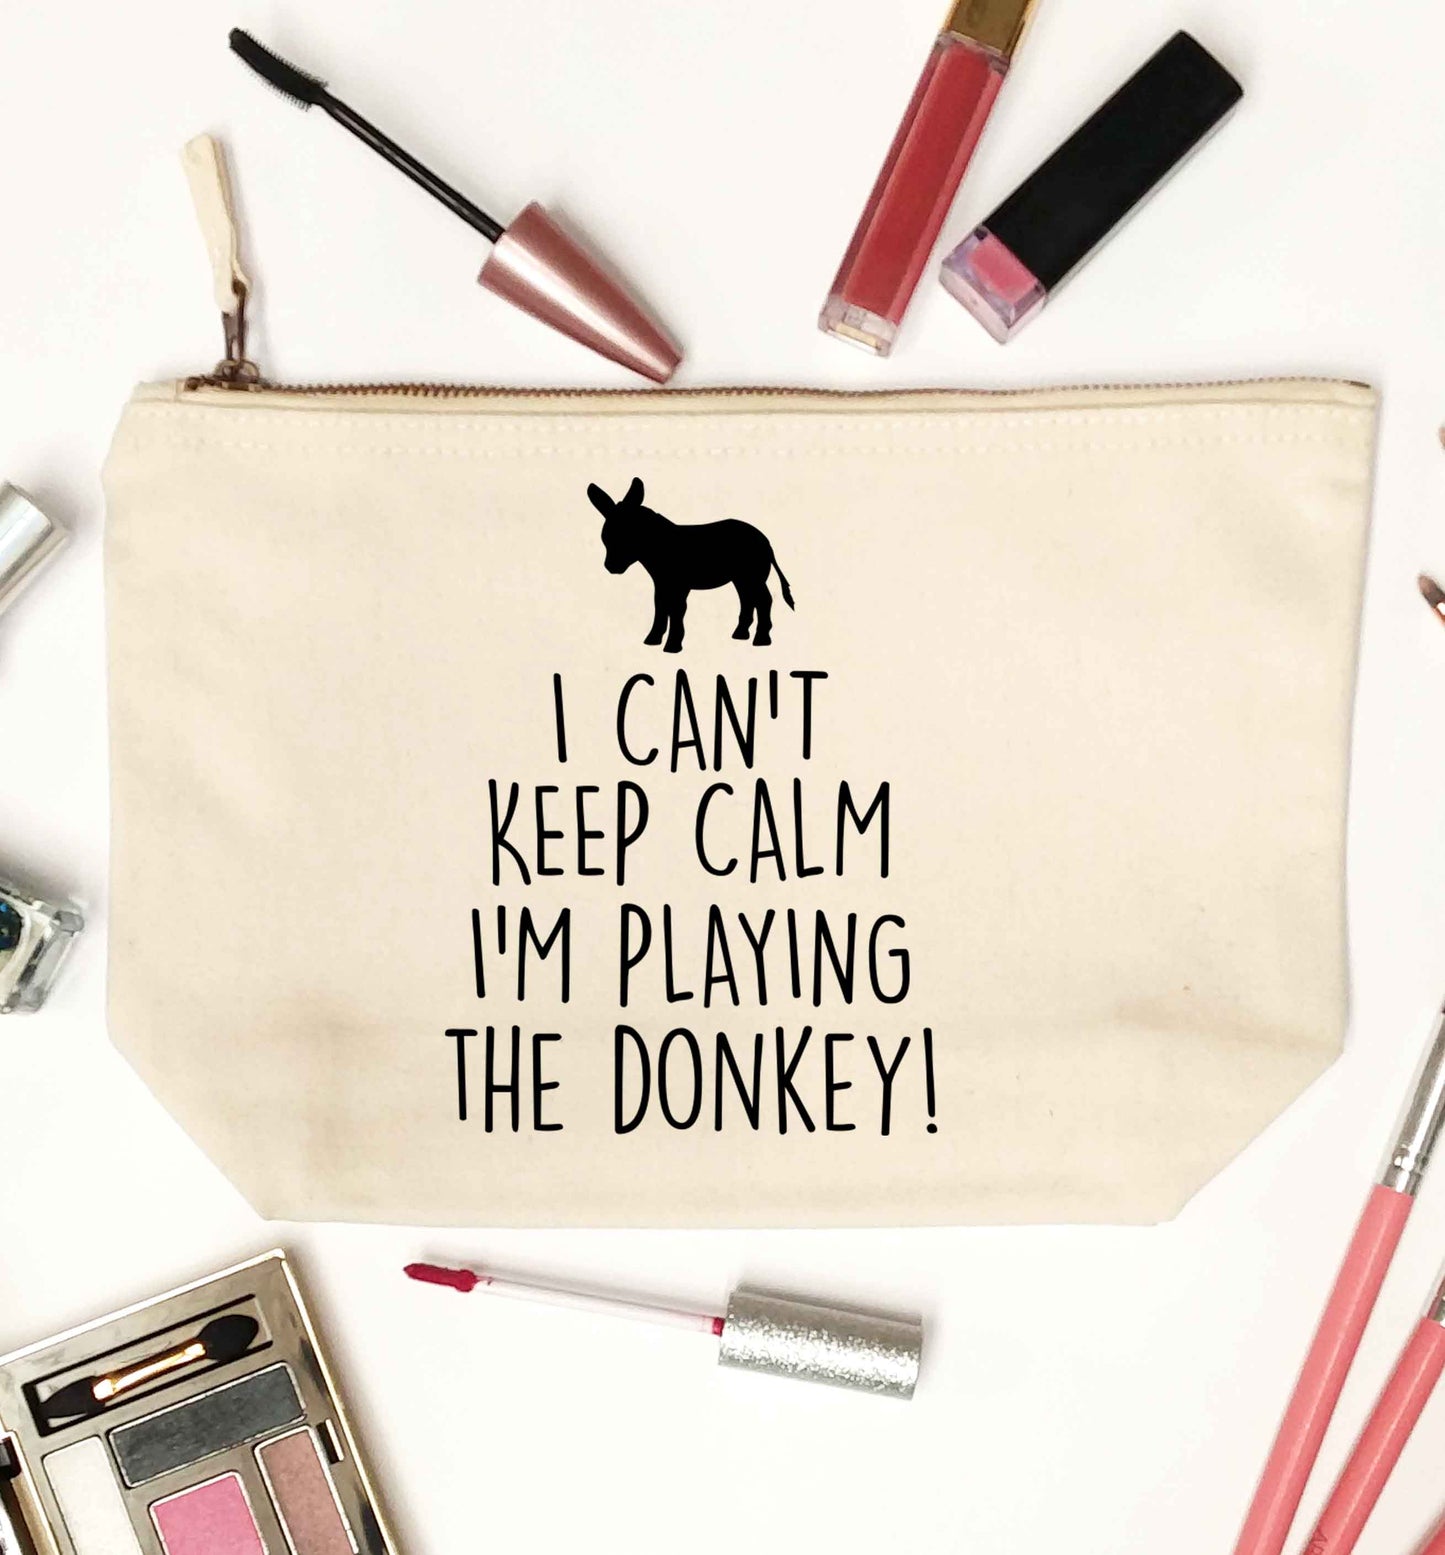 I can't keep calm I'm playing the donkey! natural makeup bag